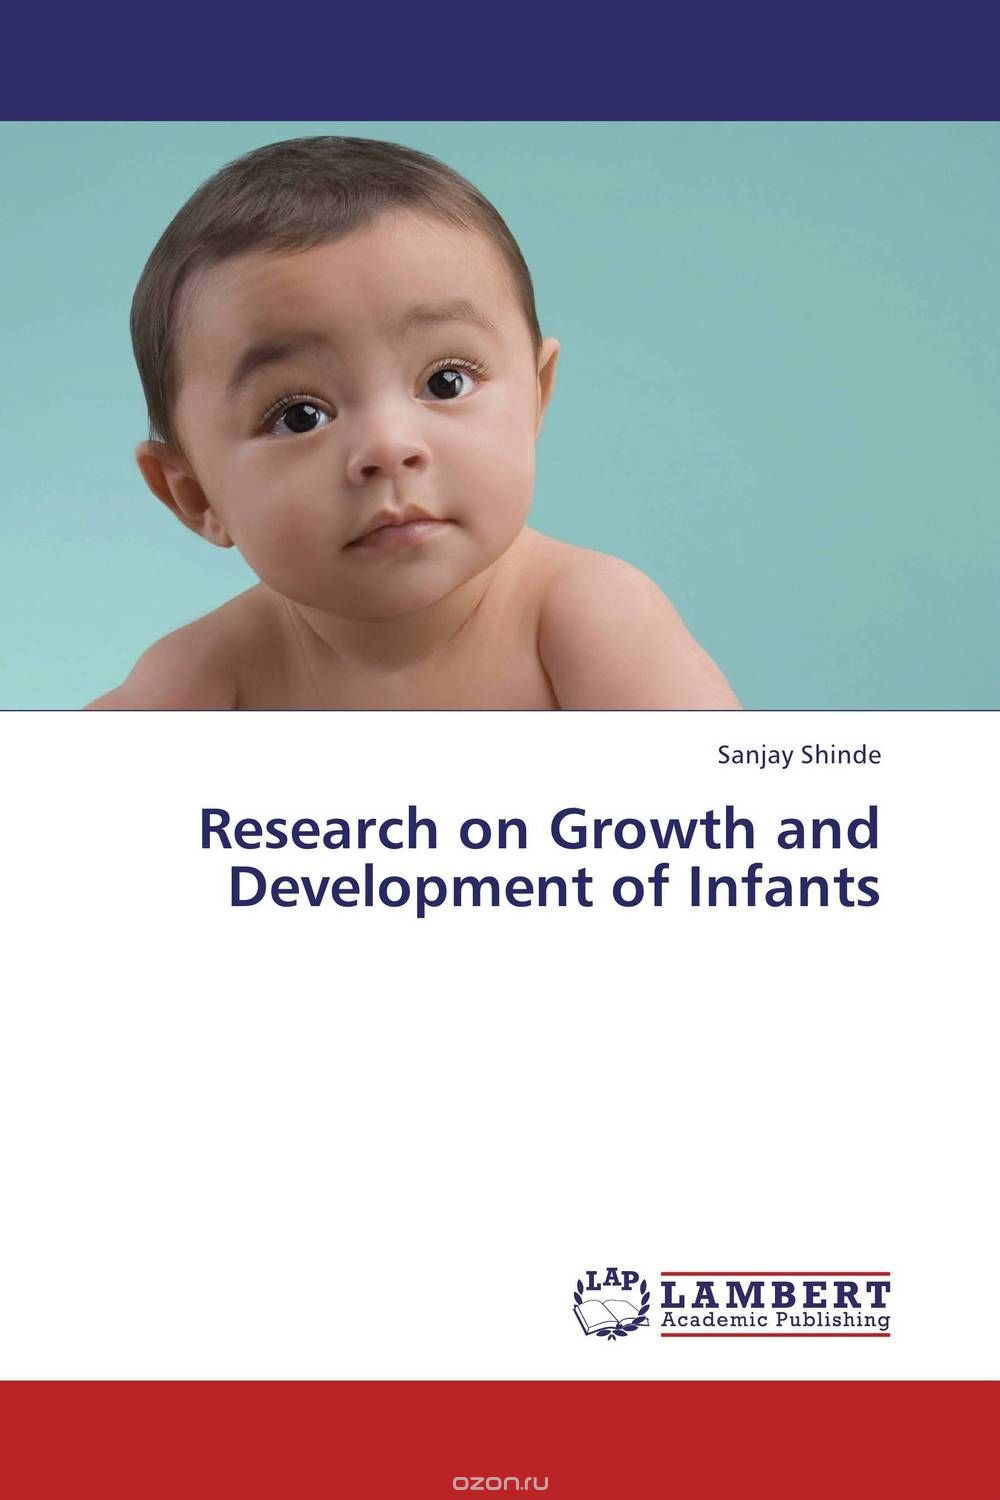 Research on Growth and Development of Infants